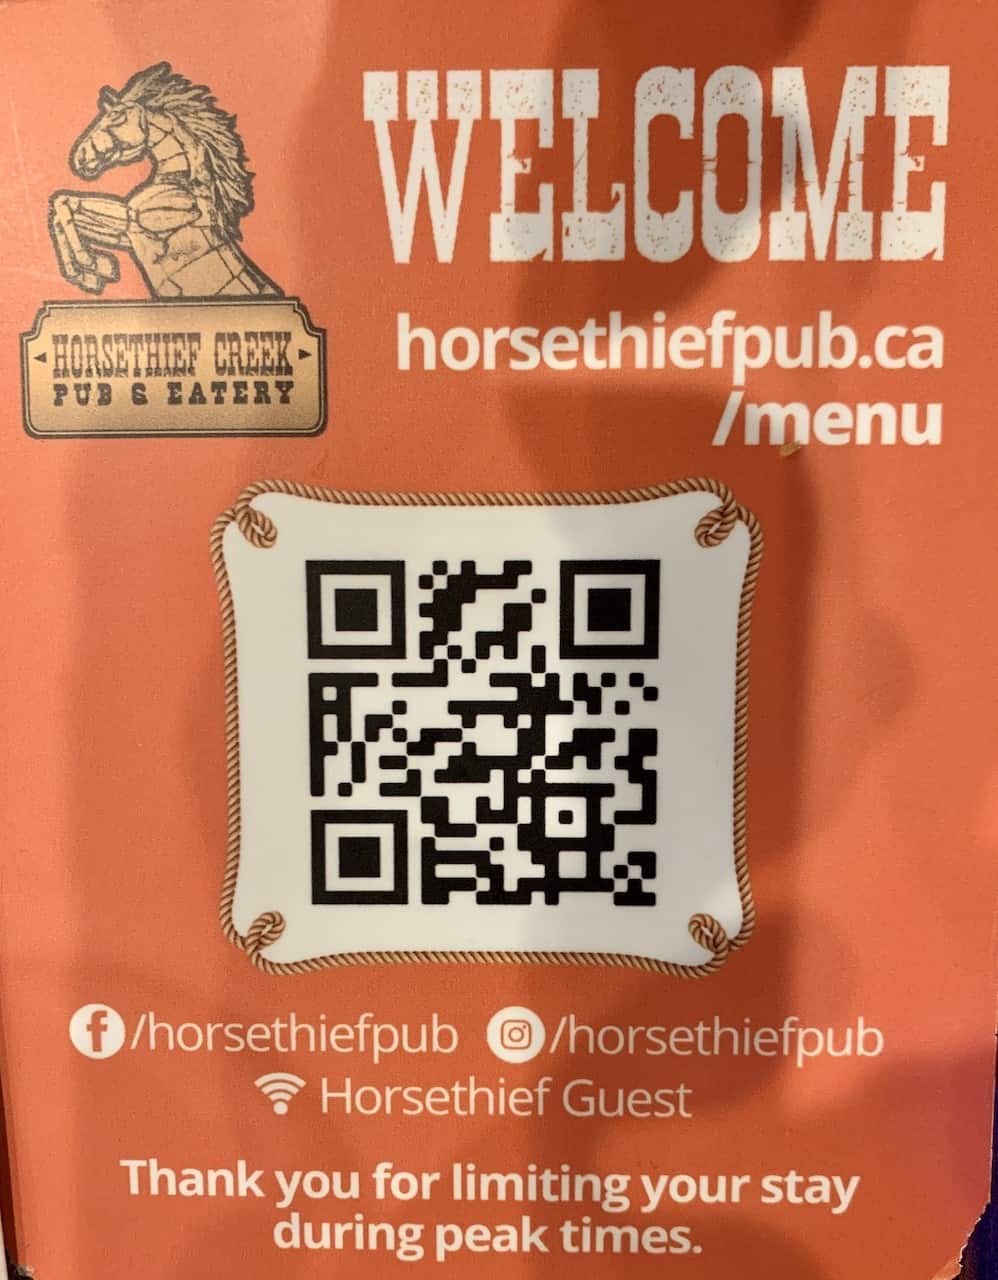 Menu Barcode at Horsethief Creek Pub  - The menu was easily accessed by scanning the provided barcode. The menu at the Horsethief Creek Pub & Eatery in Radium Hot Springs, British Columbia, offers a wide selection of food options. They have something for everyone!